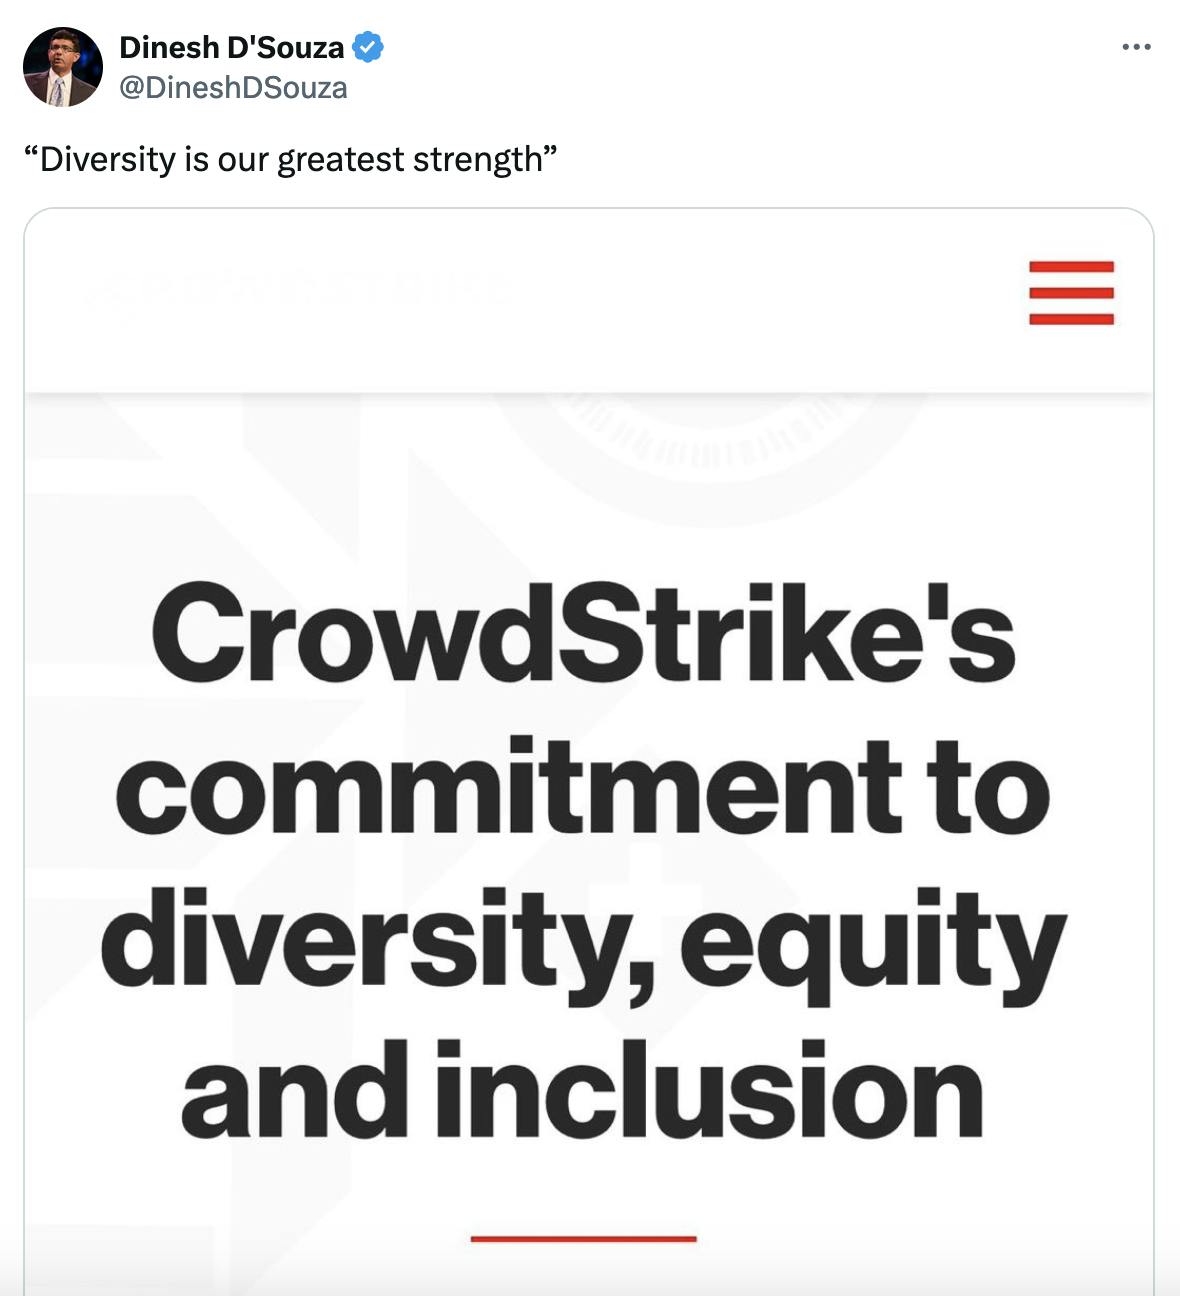 Twitter screenshot Dinesh D'Souza @DineshDSouza: “Diversity is our greatest strength” with a screenshot of a Crowdstrike statement: "Crowdstrike's commitment to diversity, equity, and inclusion"